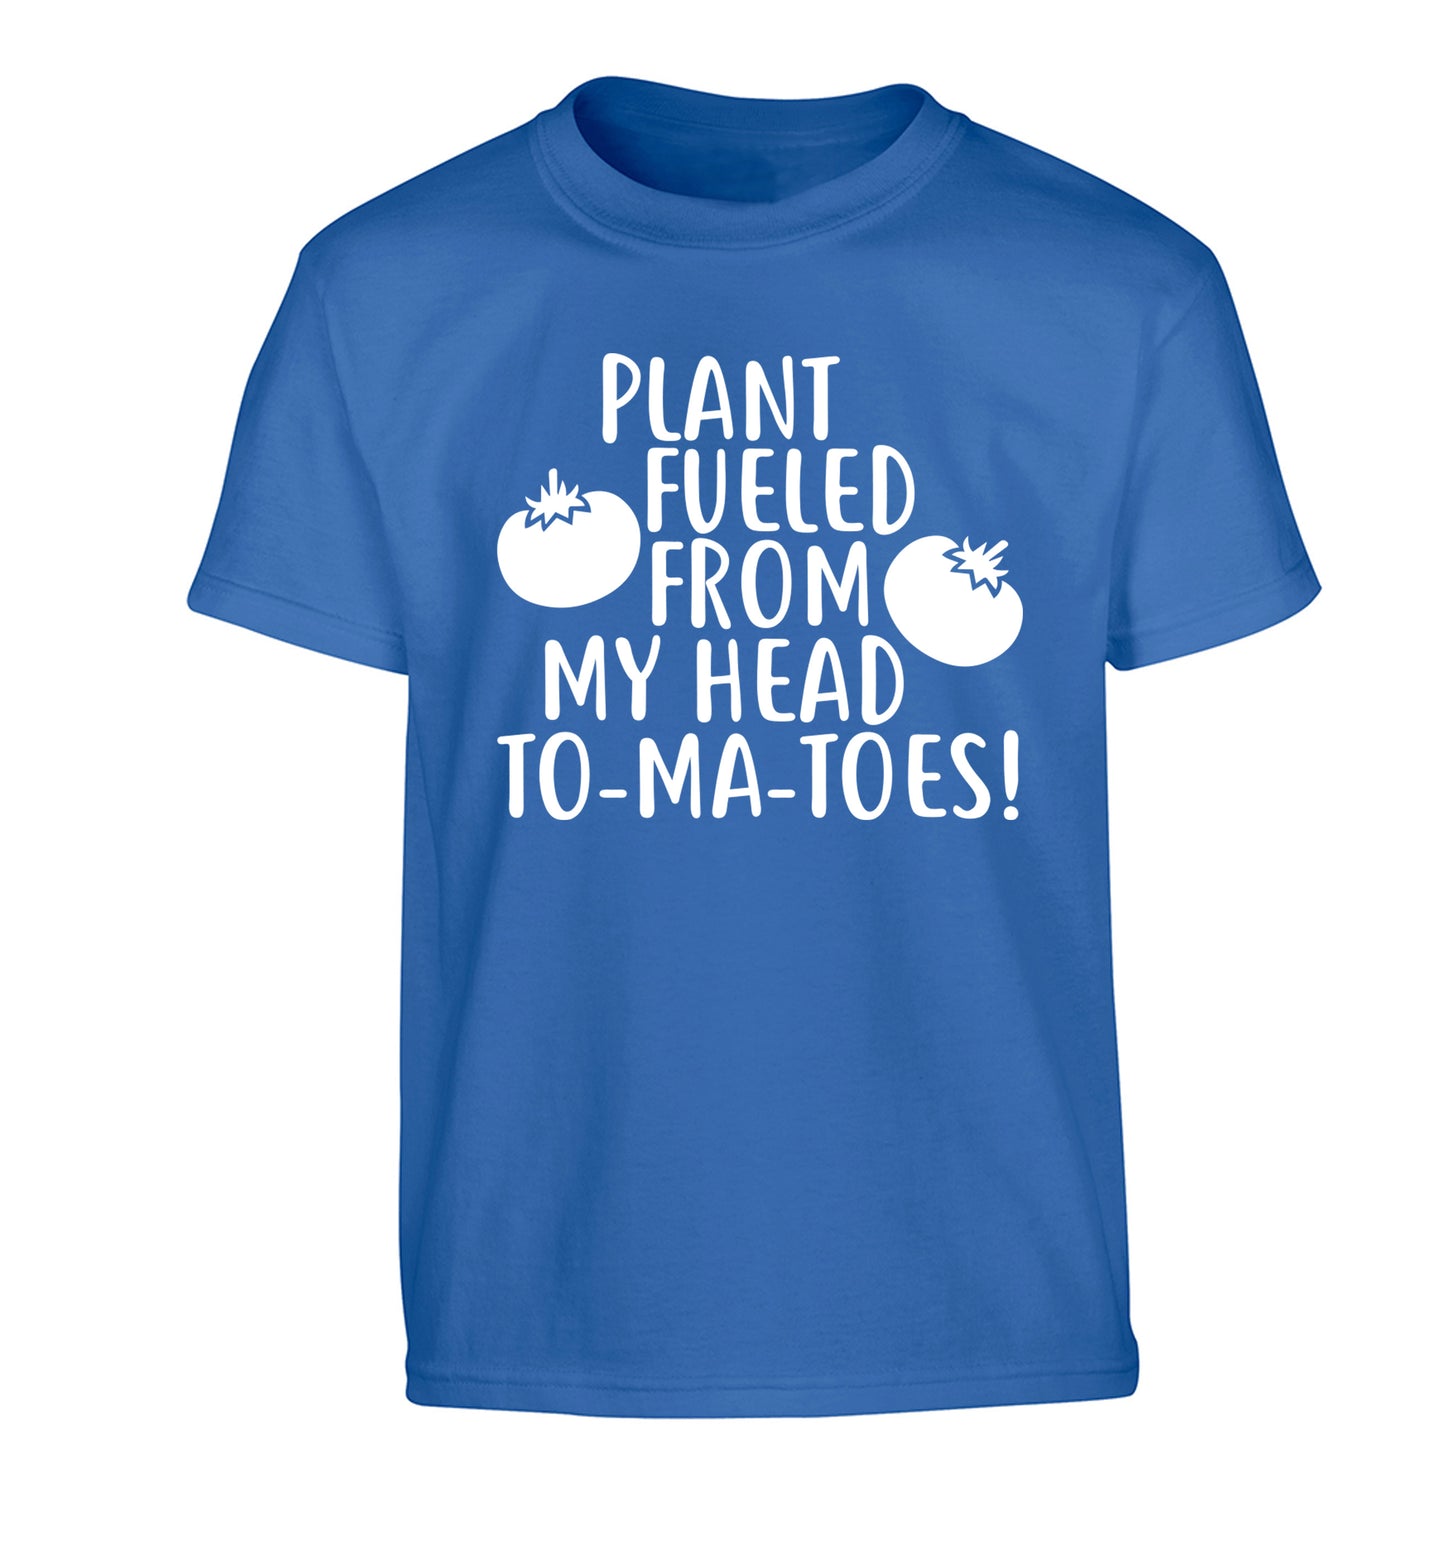 Plant fueled from my head to-ma-toes Children's blue Tshirt 12-14 Years